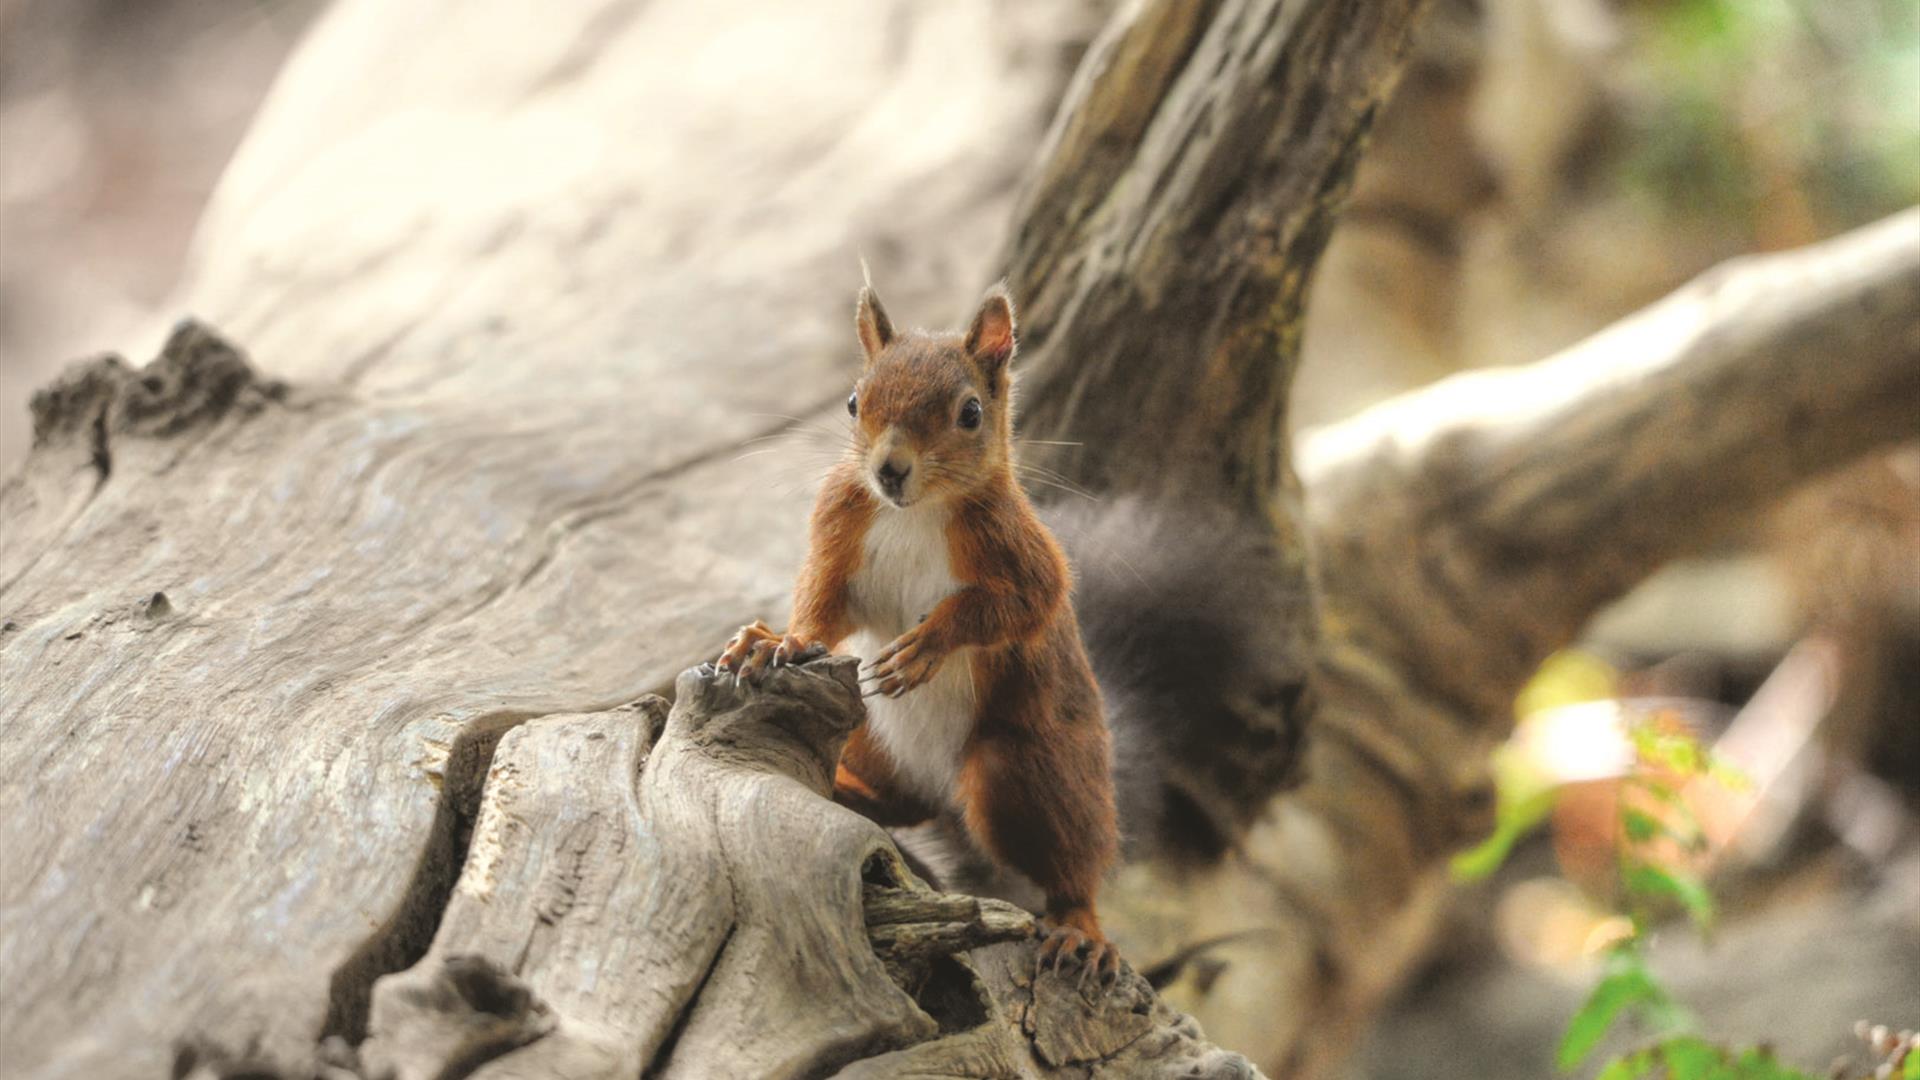 Native Brownsea Island Red squirrel with nut